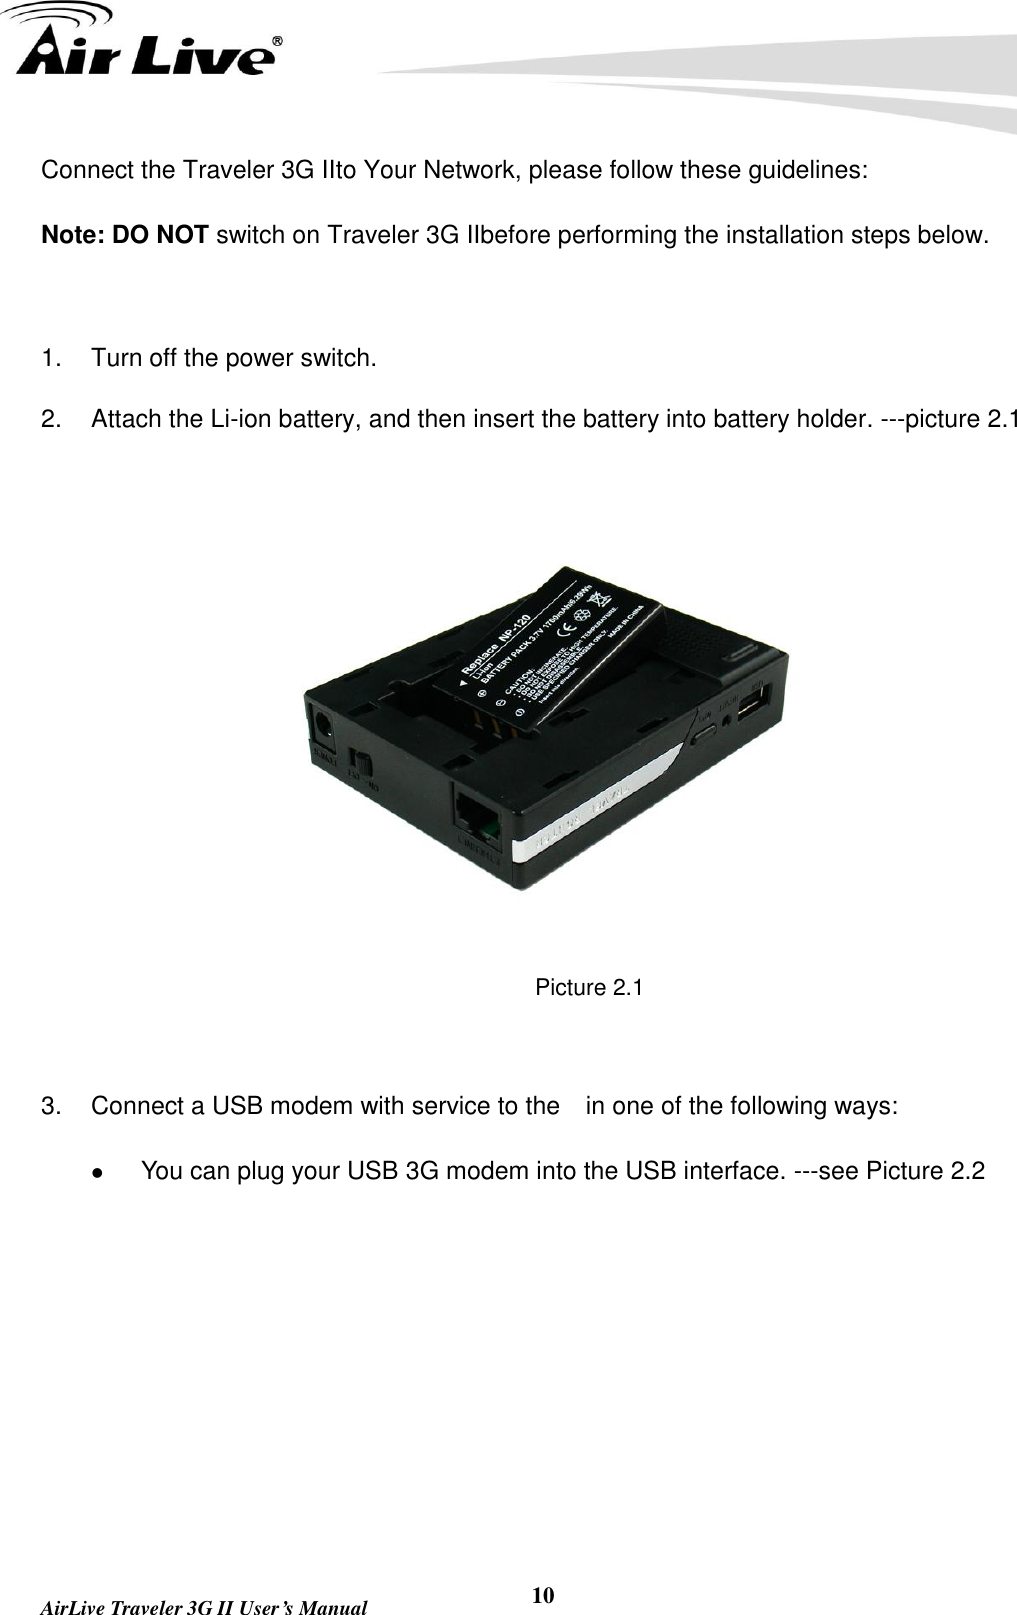   AirLive Traveler 3G II User’s Manual 10 Connect the Traveler 3G IIto Your Network, please follow these guidelines: Note: DO NOT switch on Traveler 3G IIbefore performing the installation steps below.  1.  Turn off the power switch. 2.  Attach the Li-ion battery, and then insert the battery into battery holder. ---picture 2.1  Picture 2.1  3.  Connect a USB modem with service to the    in one of the following ways:  You can plug your USB 3G modem into the USB interface. ---see Picture 2.2                                    